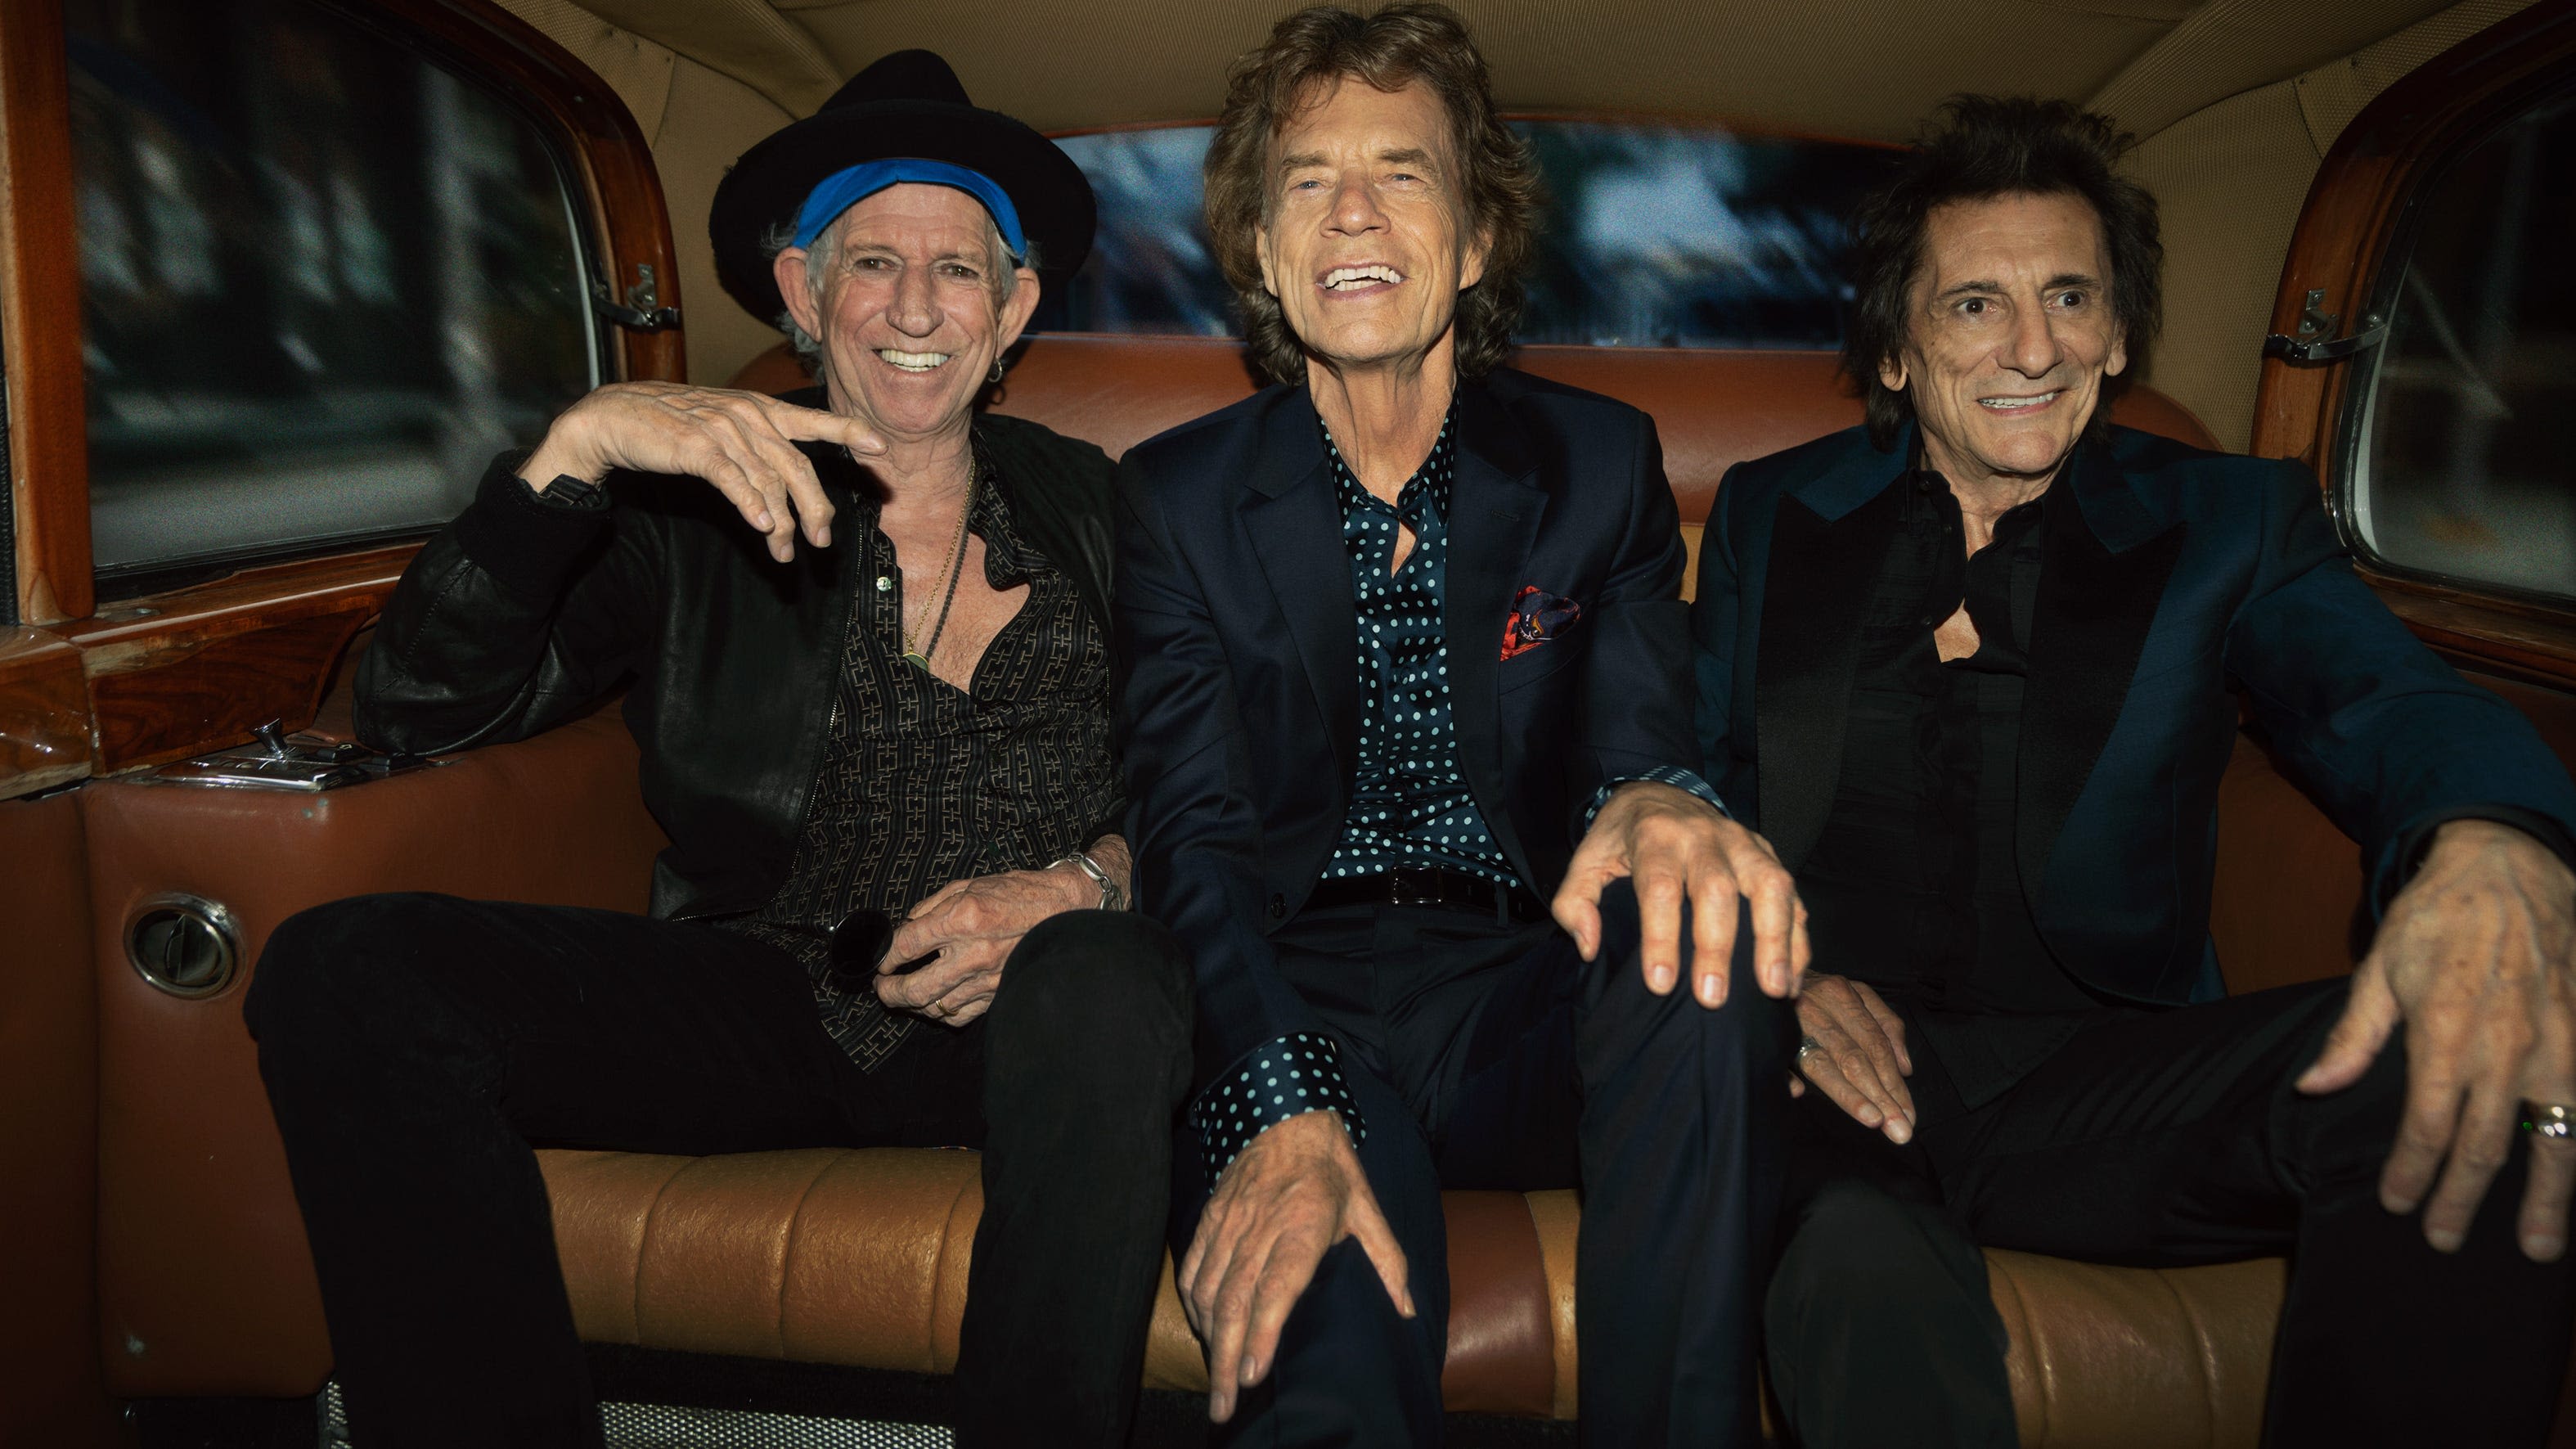 The Rolling Stones are coming to Phoenix. So is the traffic. How to minimize the aggravation